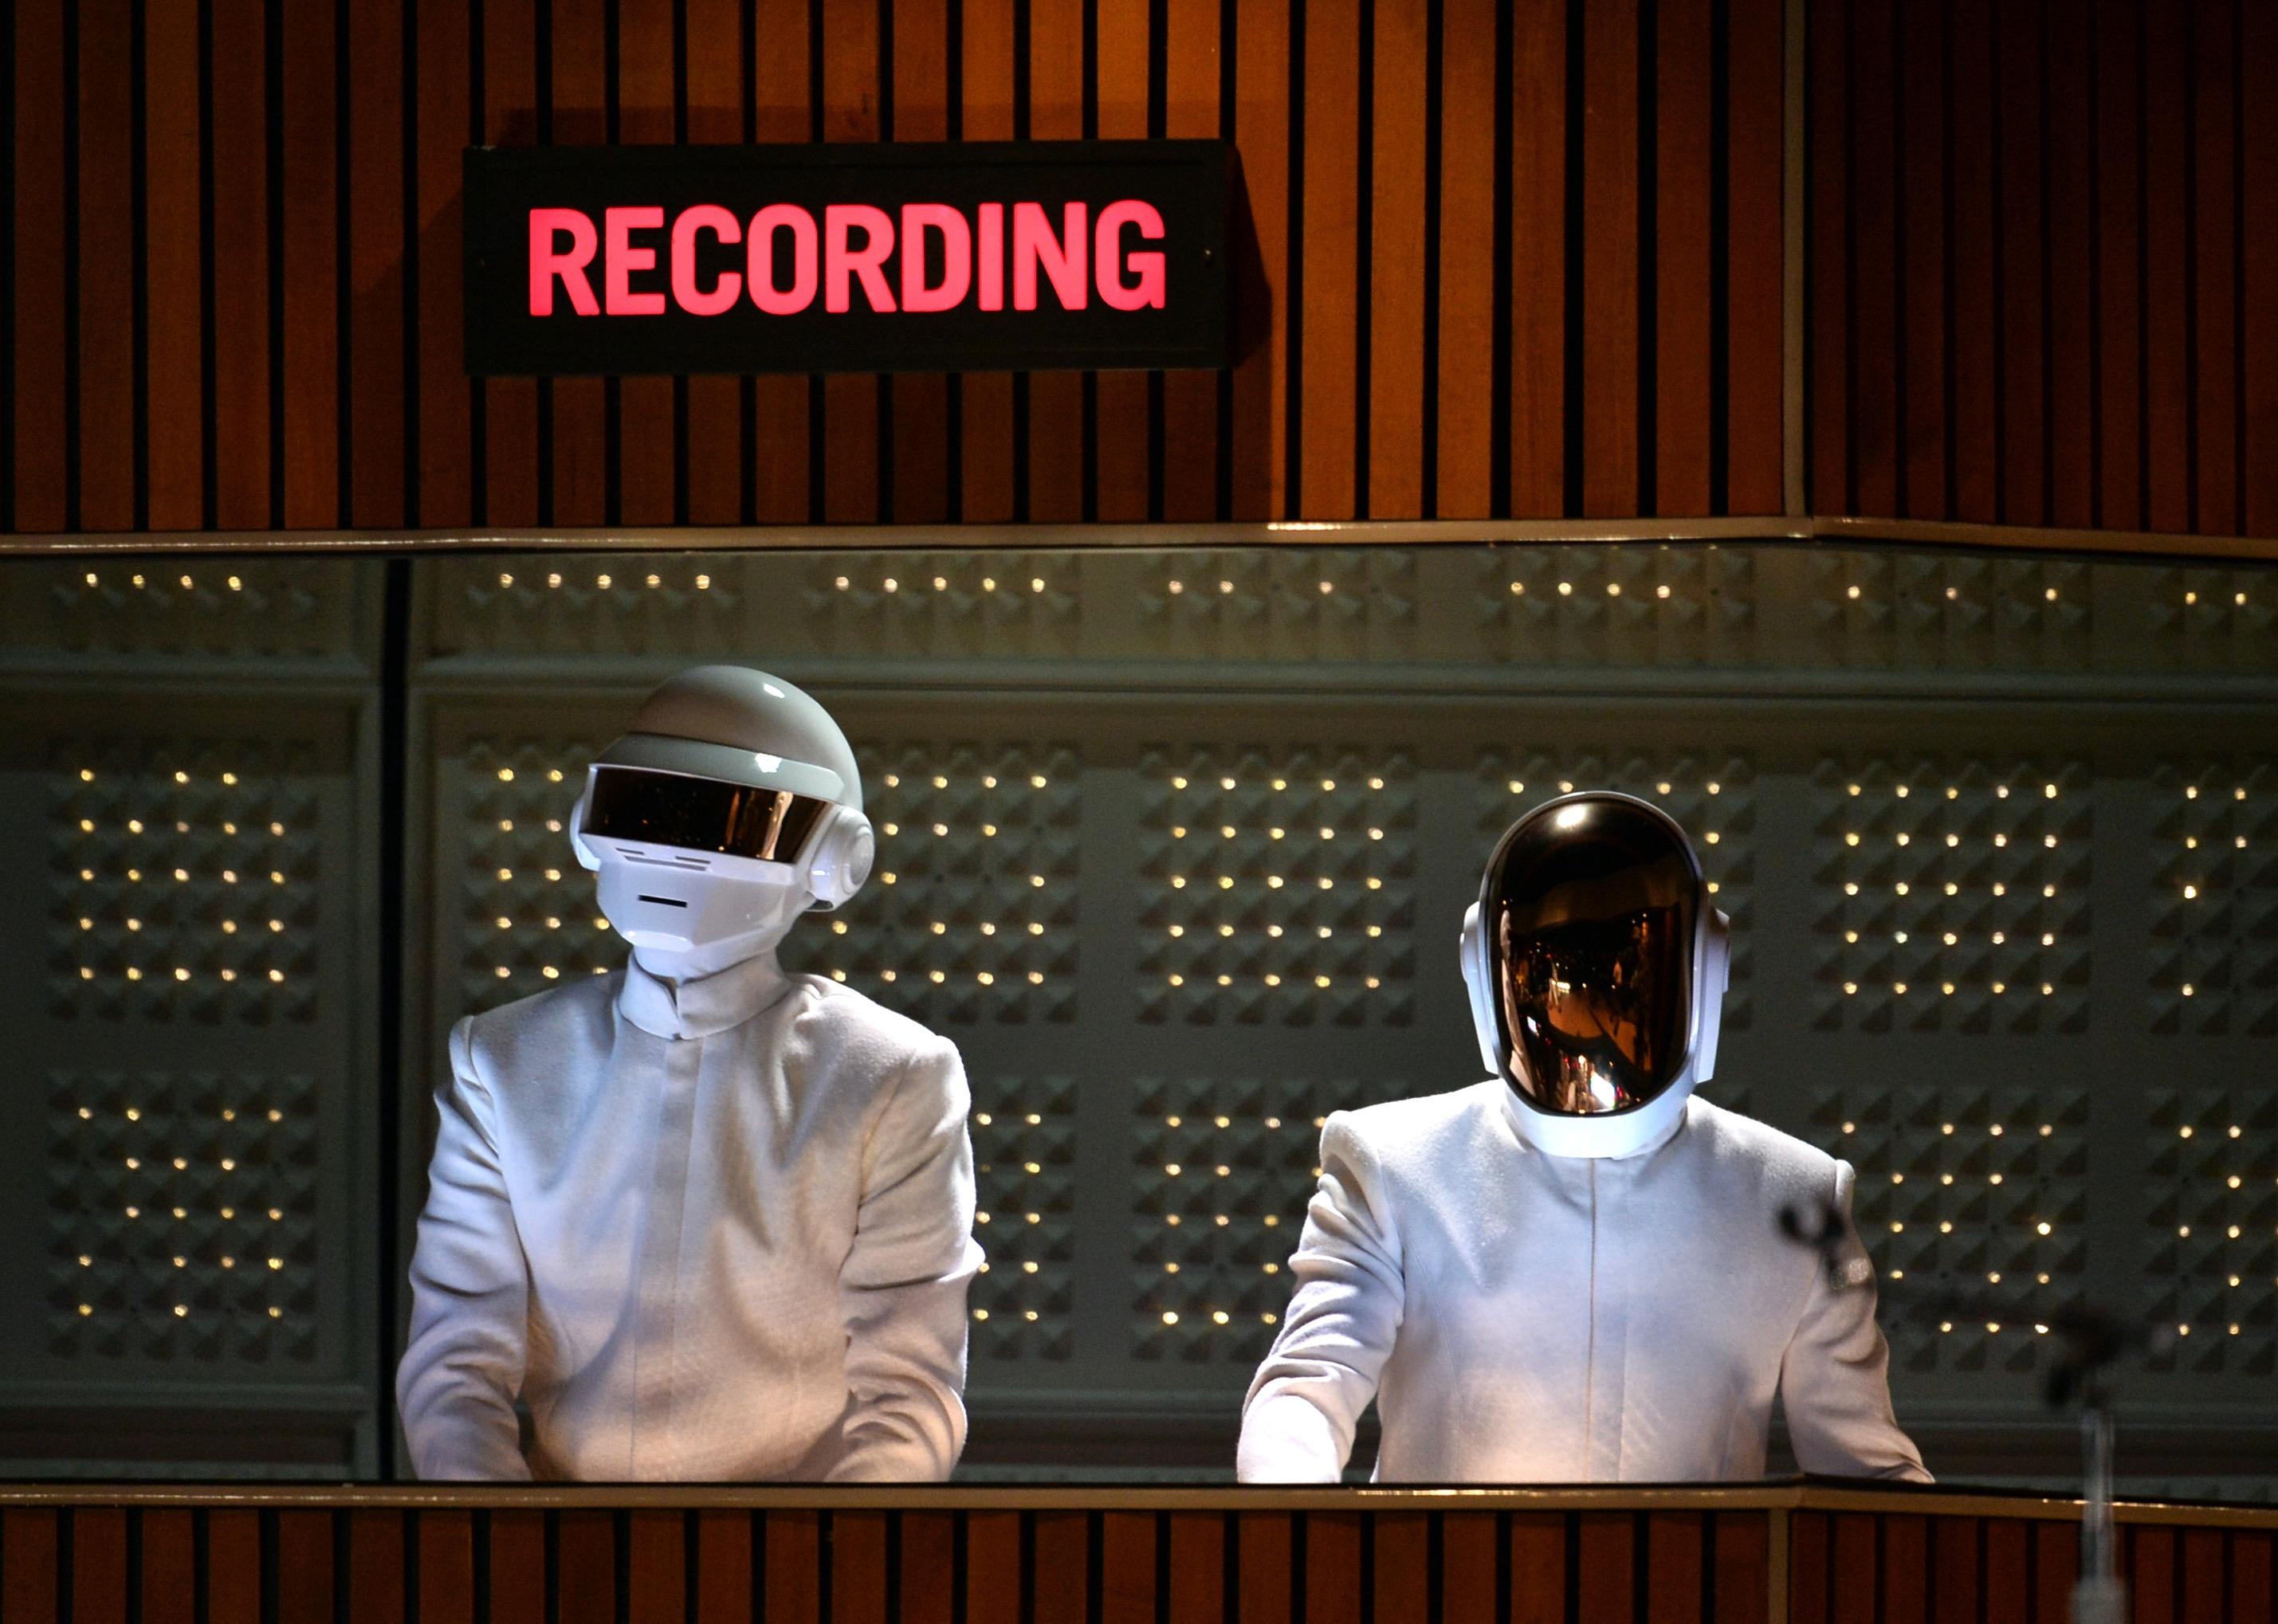 Daft Punk in white suits and helmets onstage.